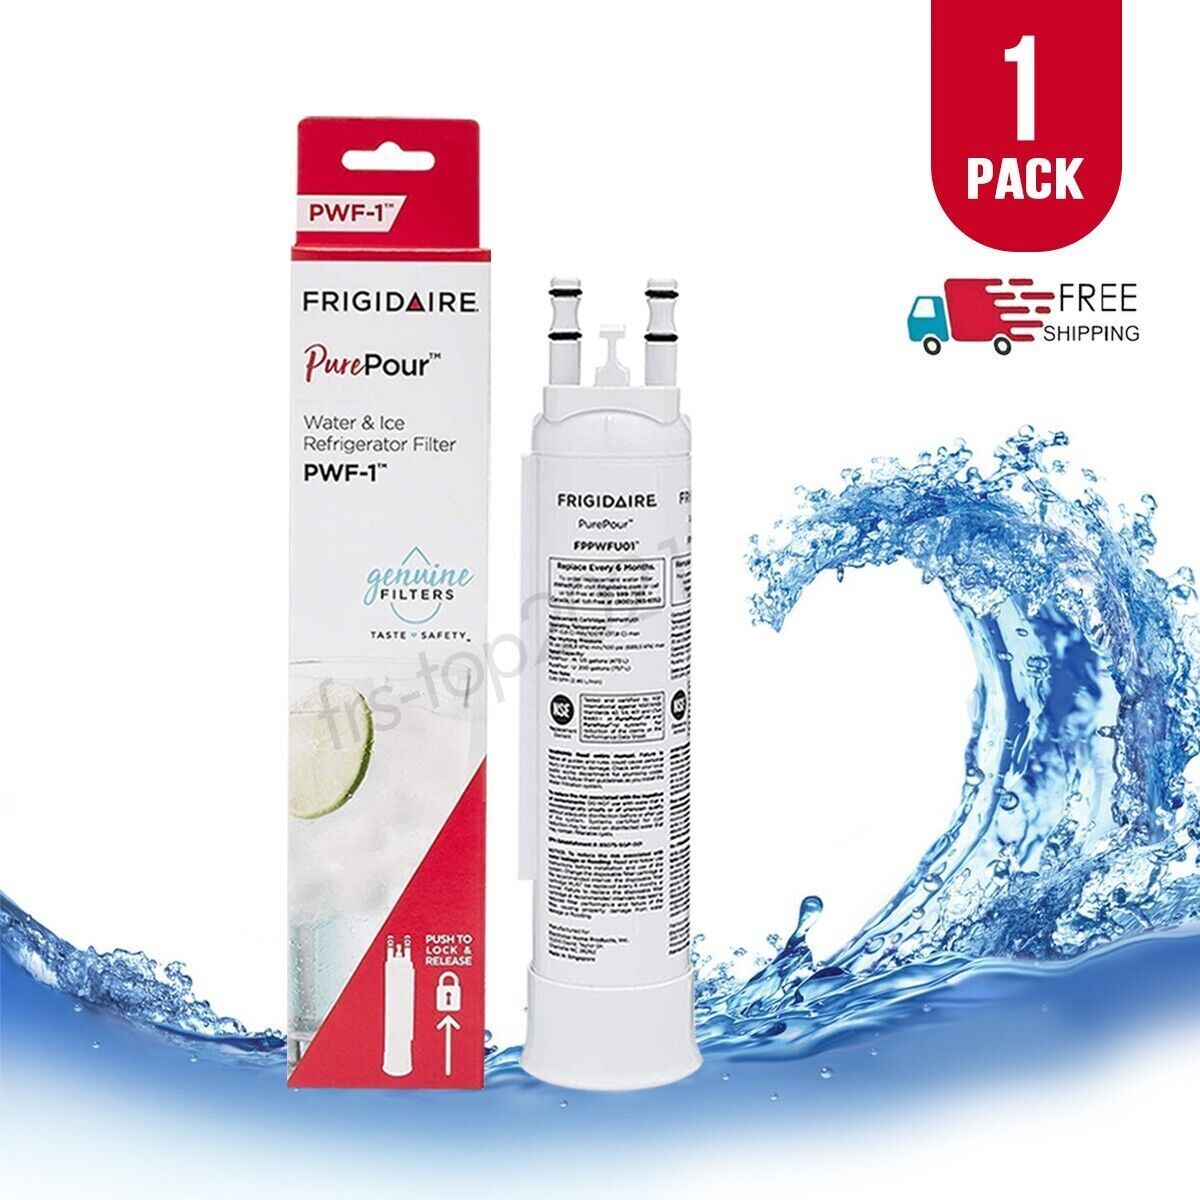 1-4 Pack Frigidaire PWF-1 FPPWFU01  Refrigerator PurePour Water &Ice Filter New